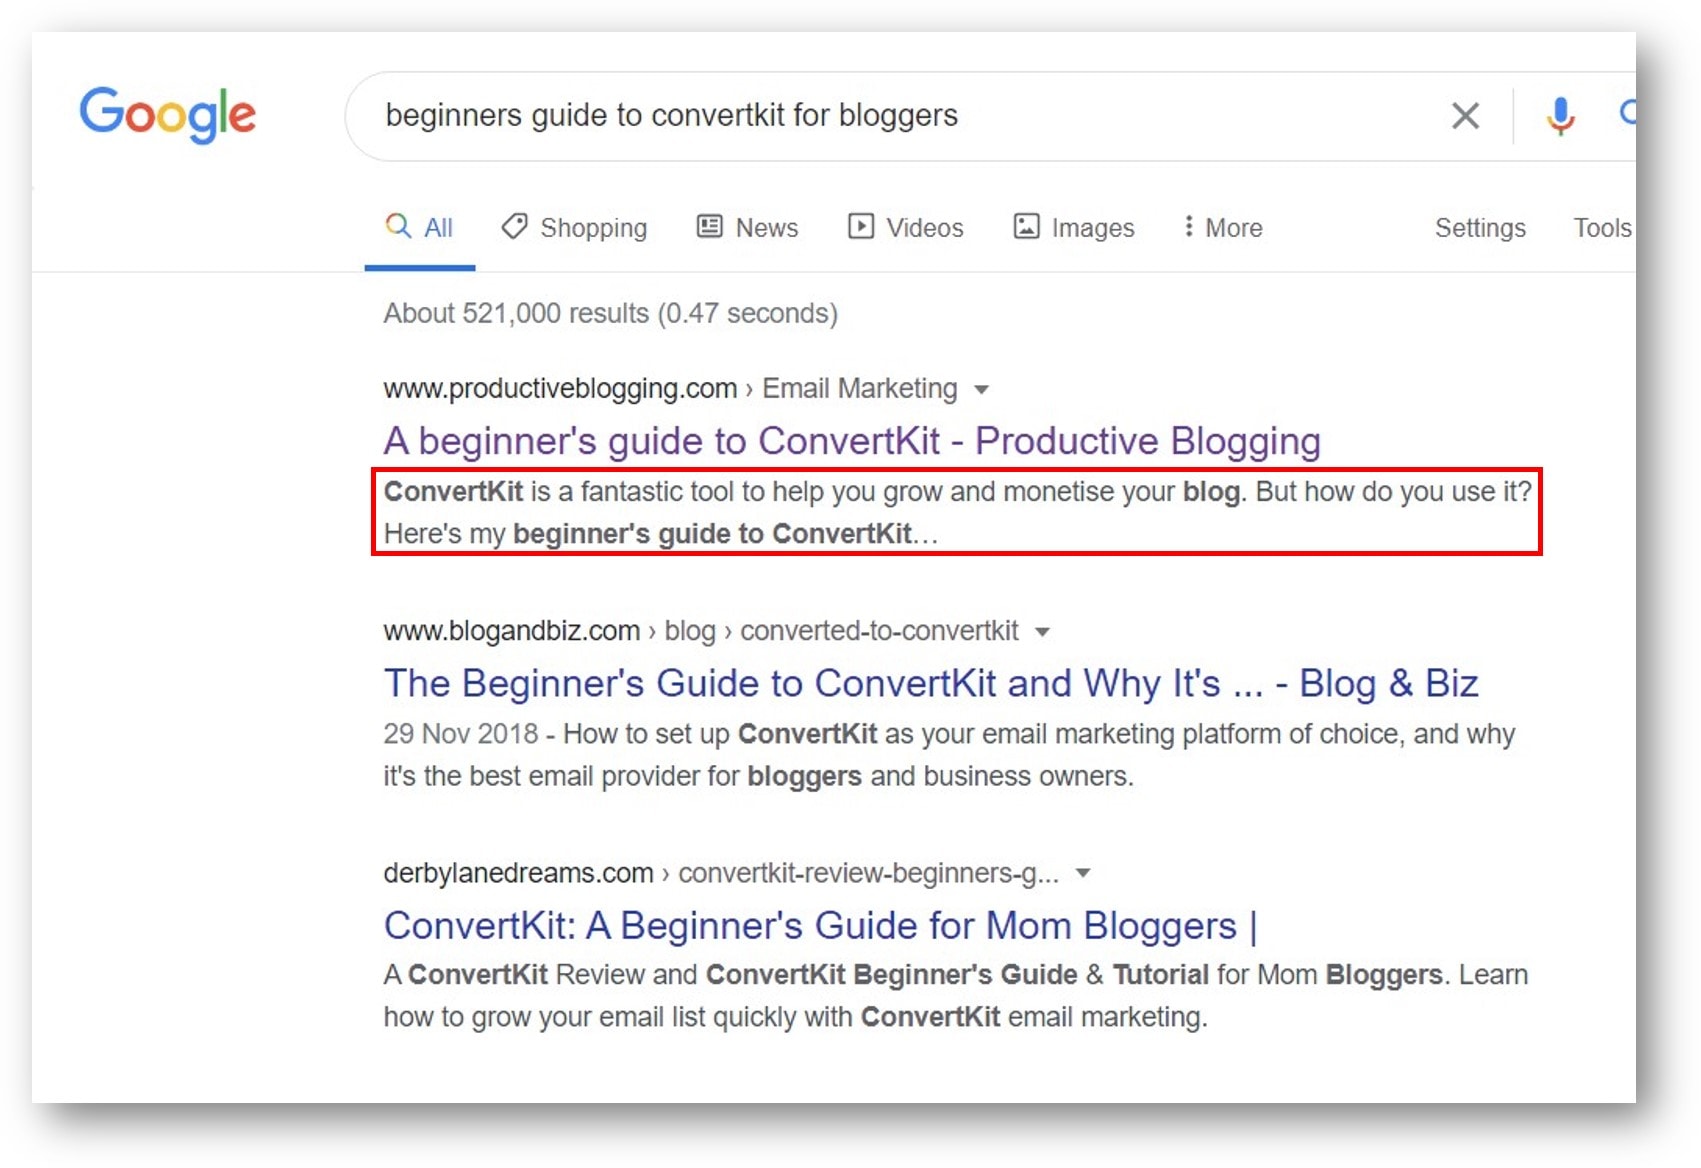 Example of a meta description which is compelling, it reads 'ConvertKit is a fantastic tool to help you grow and monetise your blog. But how do you use it? Here's my beginner's guide to ConvertKit…'